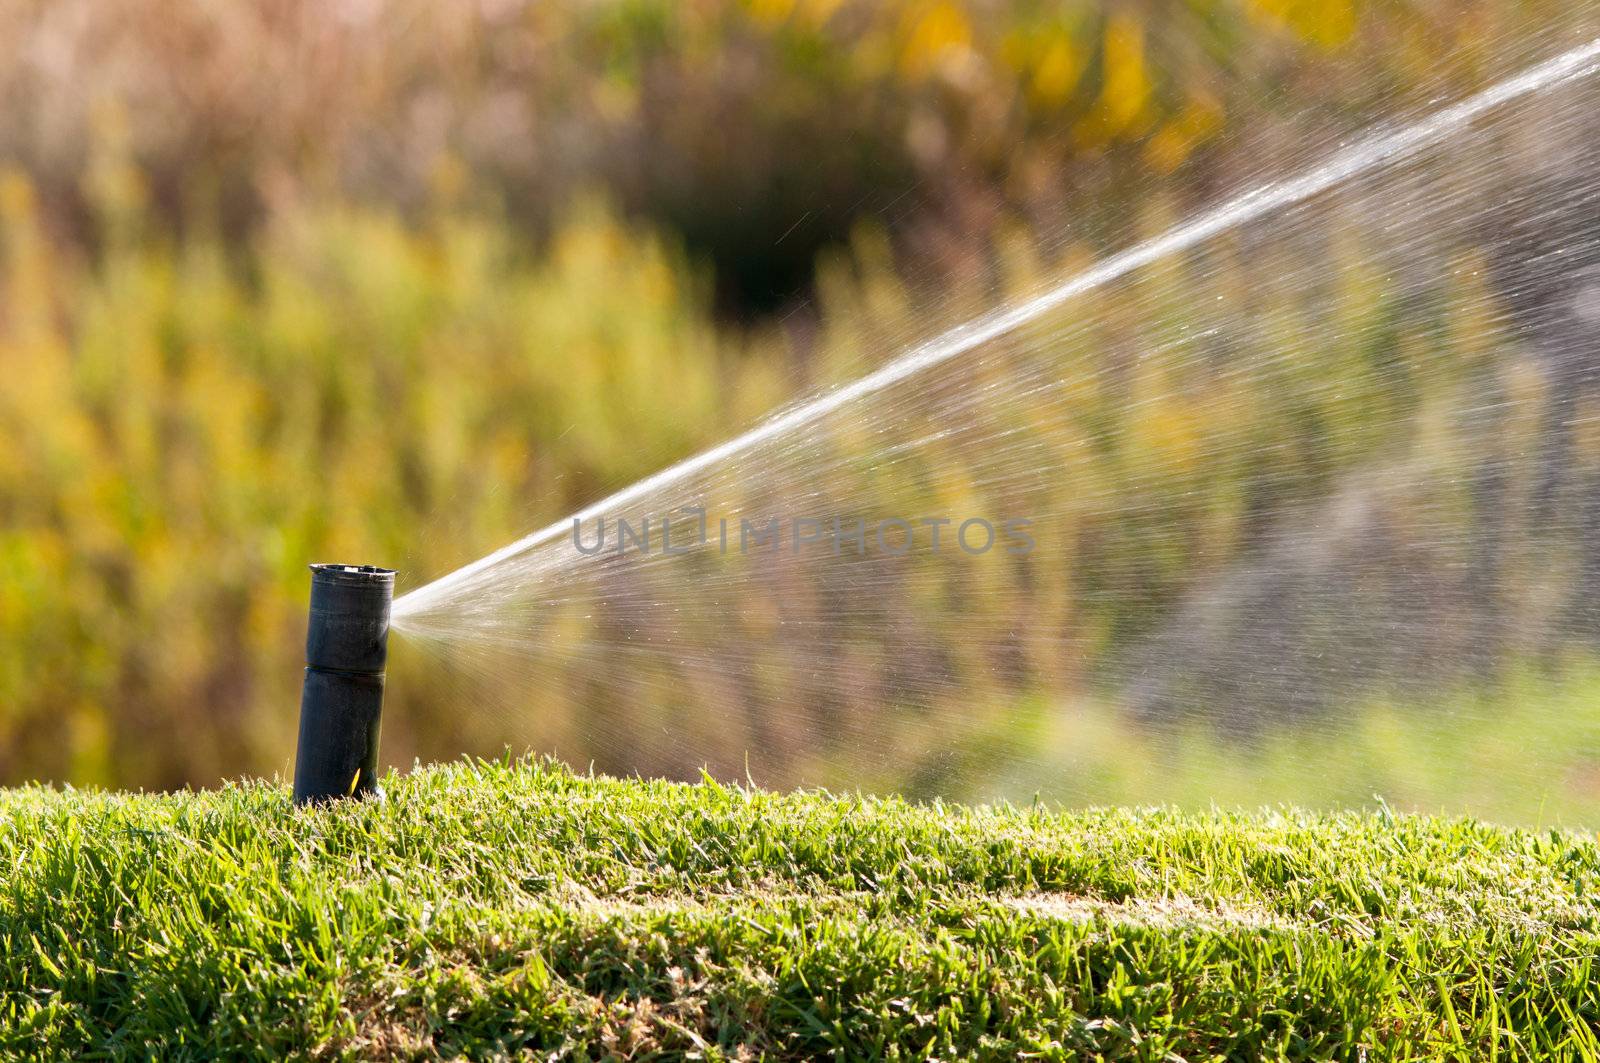 Sprinkler watering a lawn during a sunny day